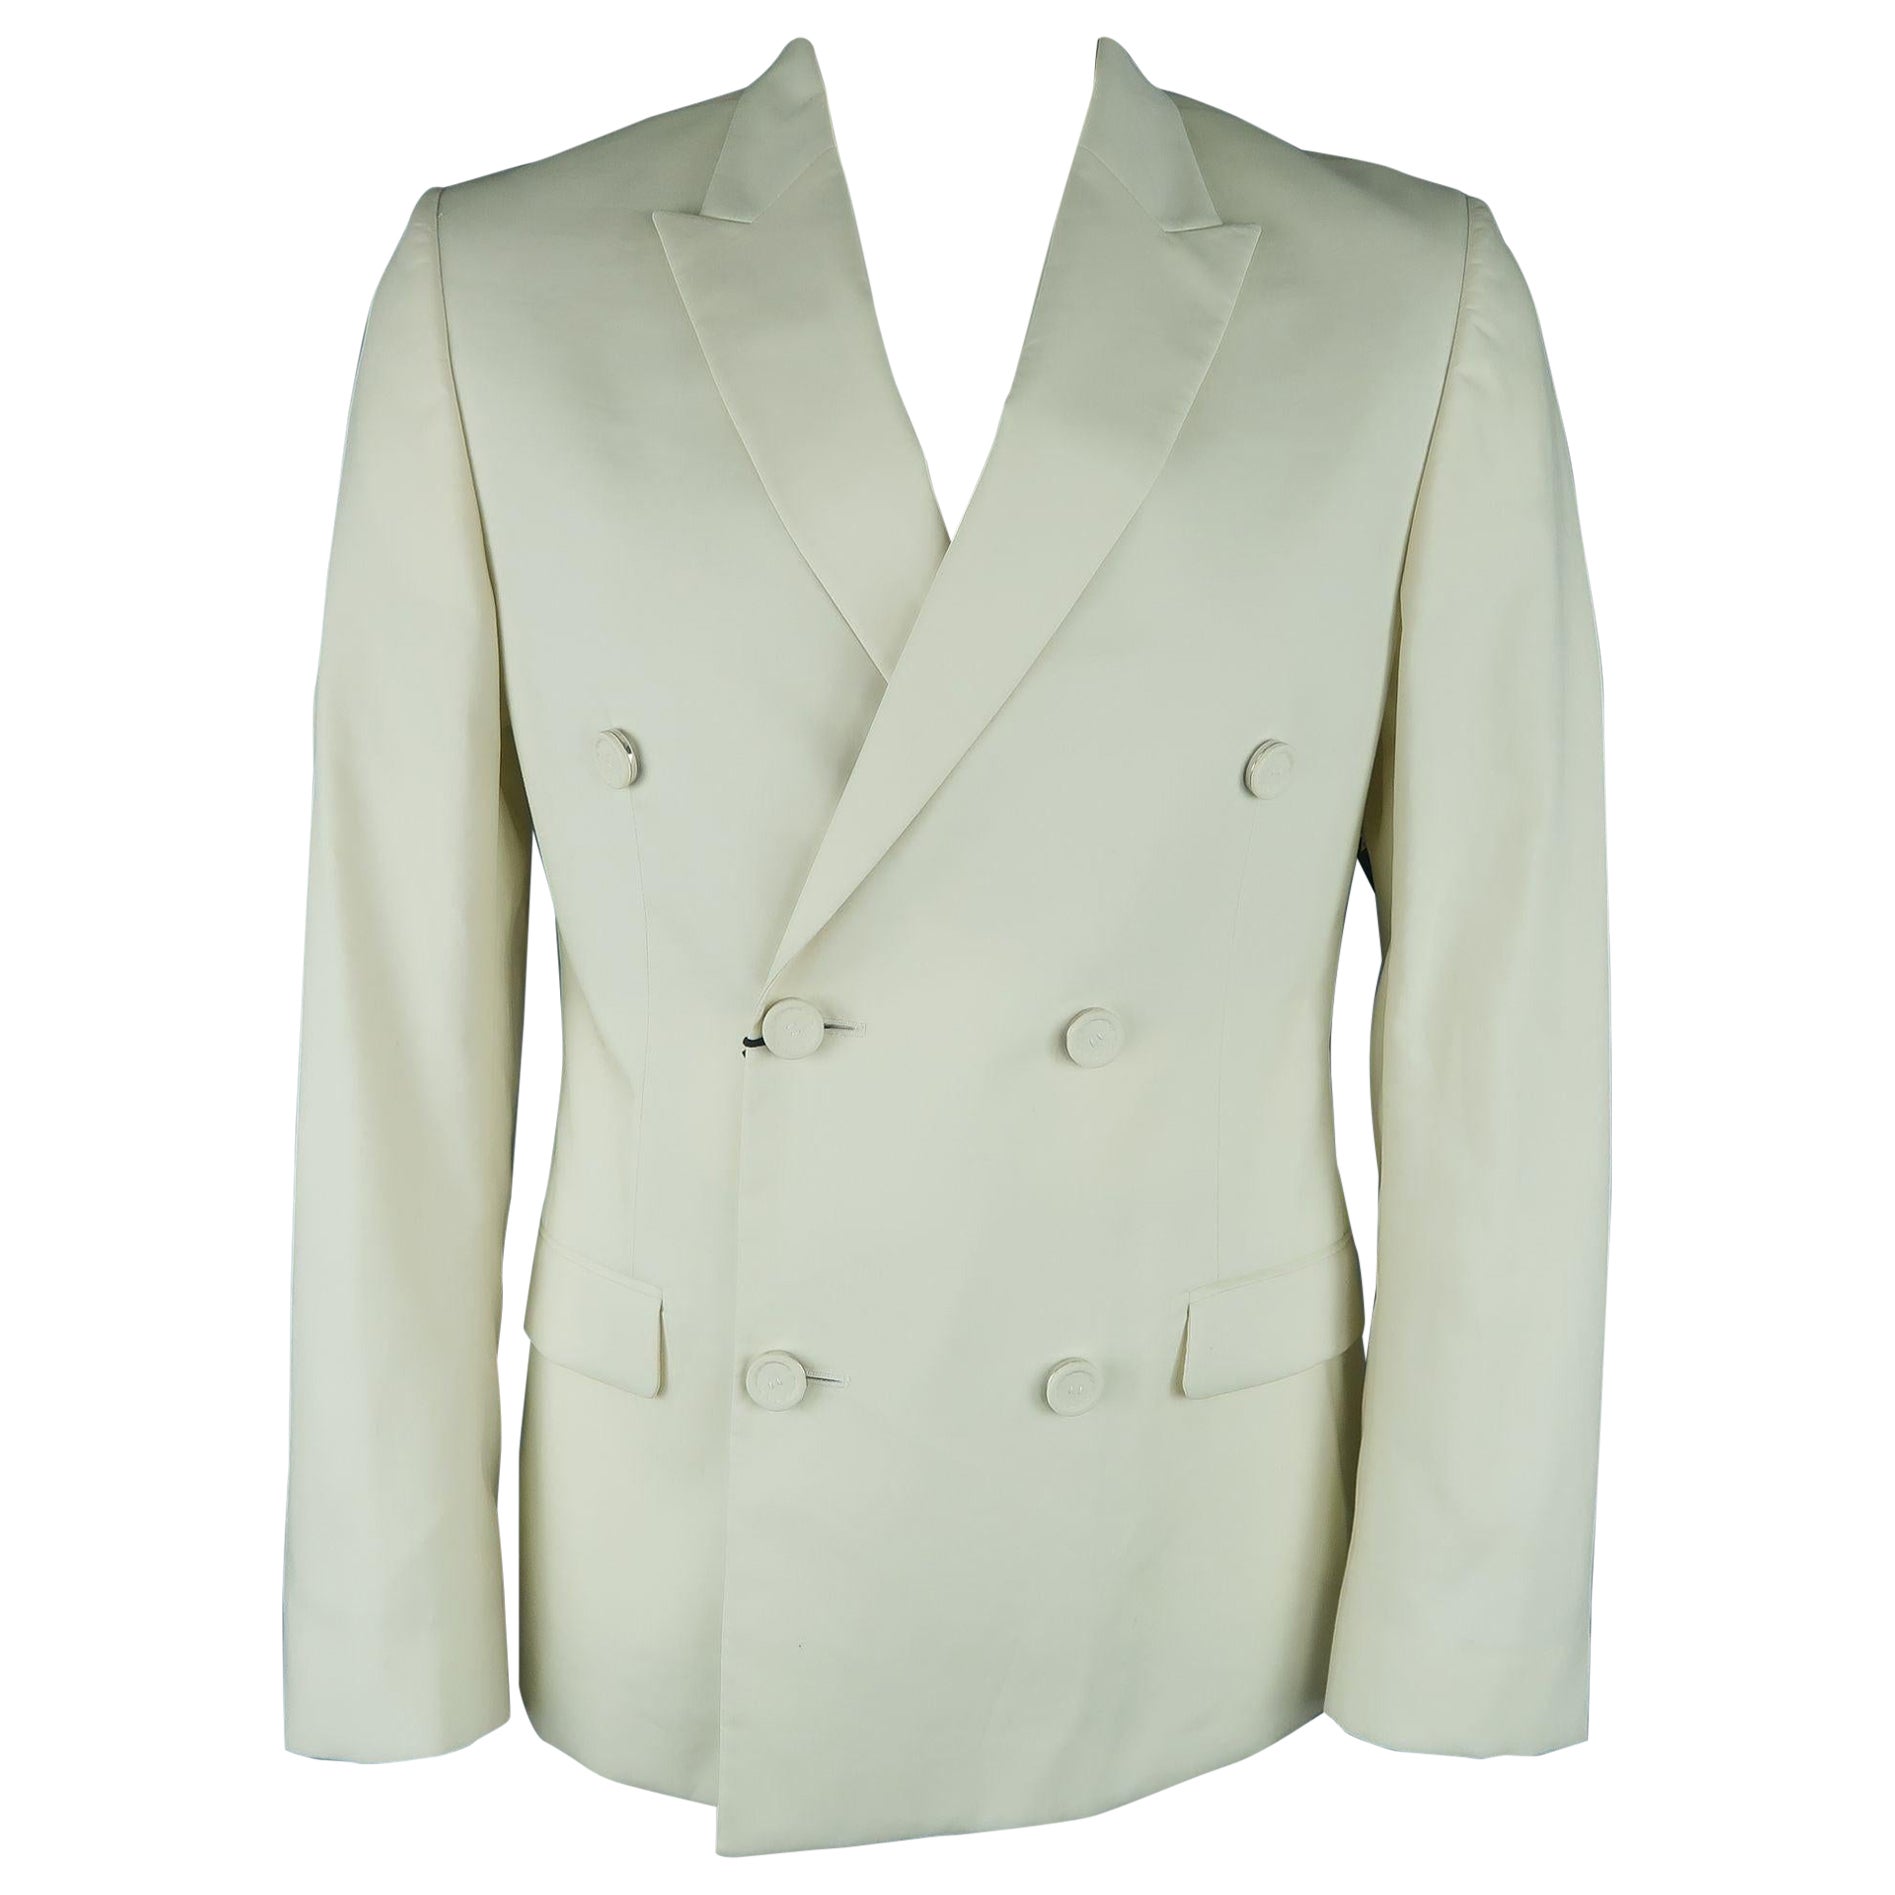 CALVIN KLEIN COLLECTION 42 Bone Cotton Double Breasted Sport Coat Jacket For Sale